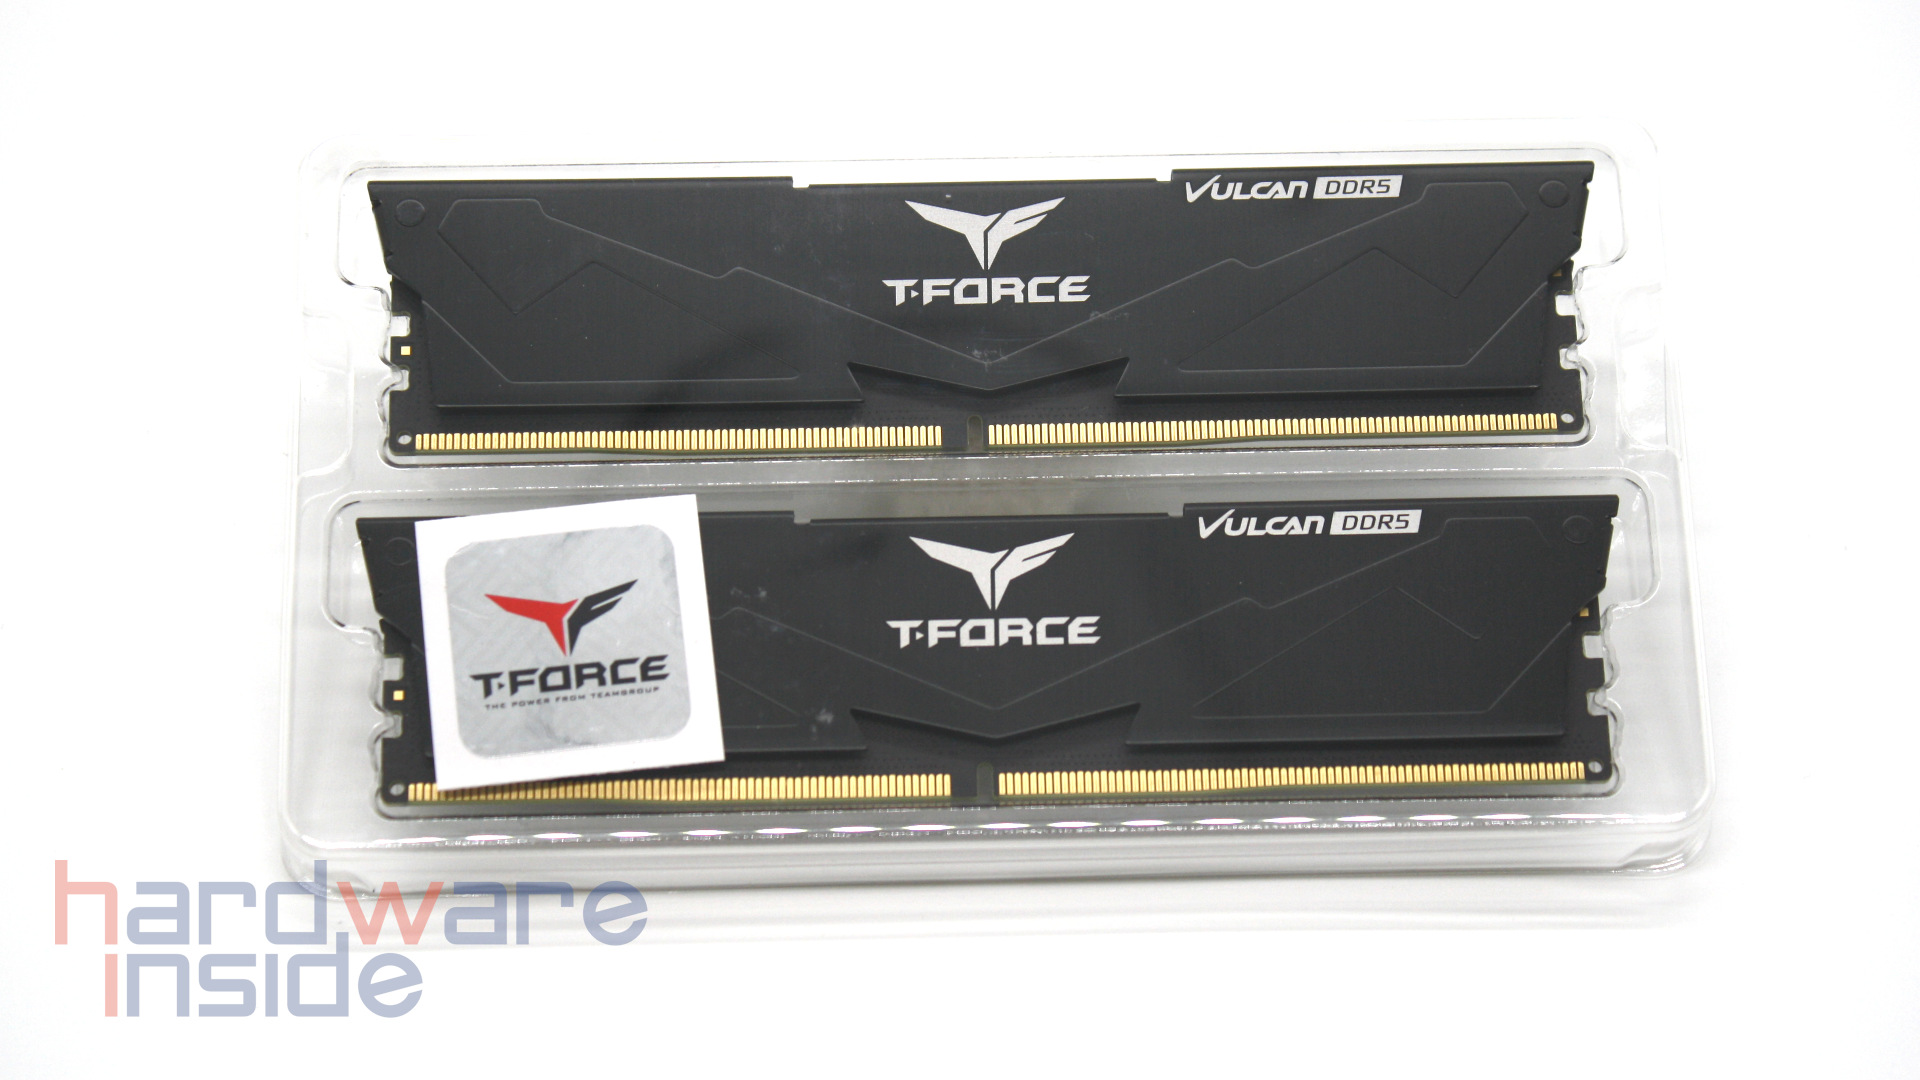 Lieferumfang des TeamGroup T-Force VULCAN DDR5-5600 Kits